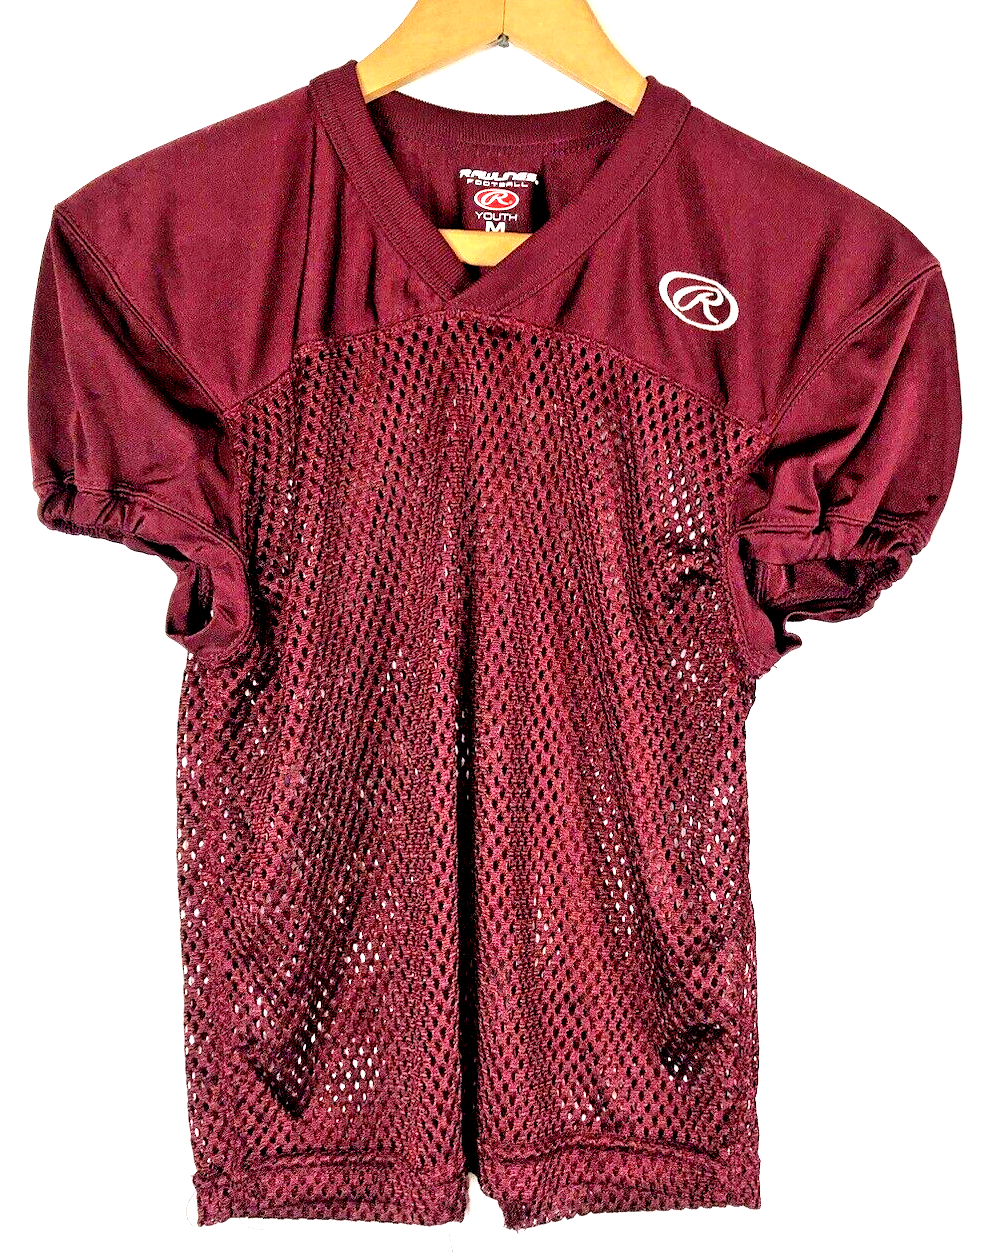 Rawlings Football Polyester Practice Jersey Maroon Burgundy Red Youth Medium - $46.57